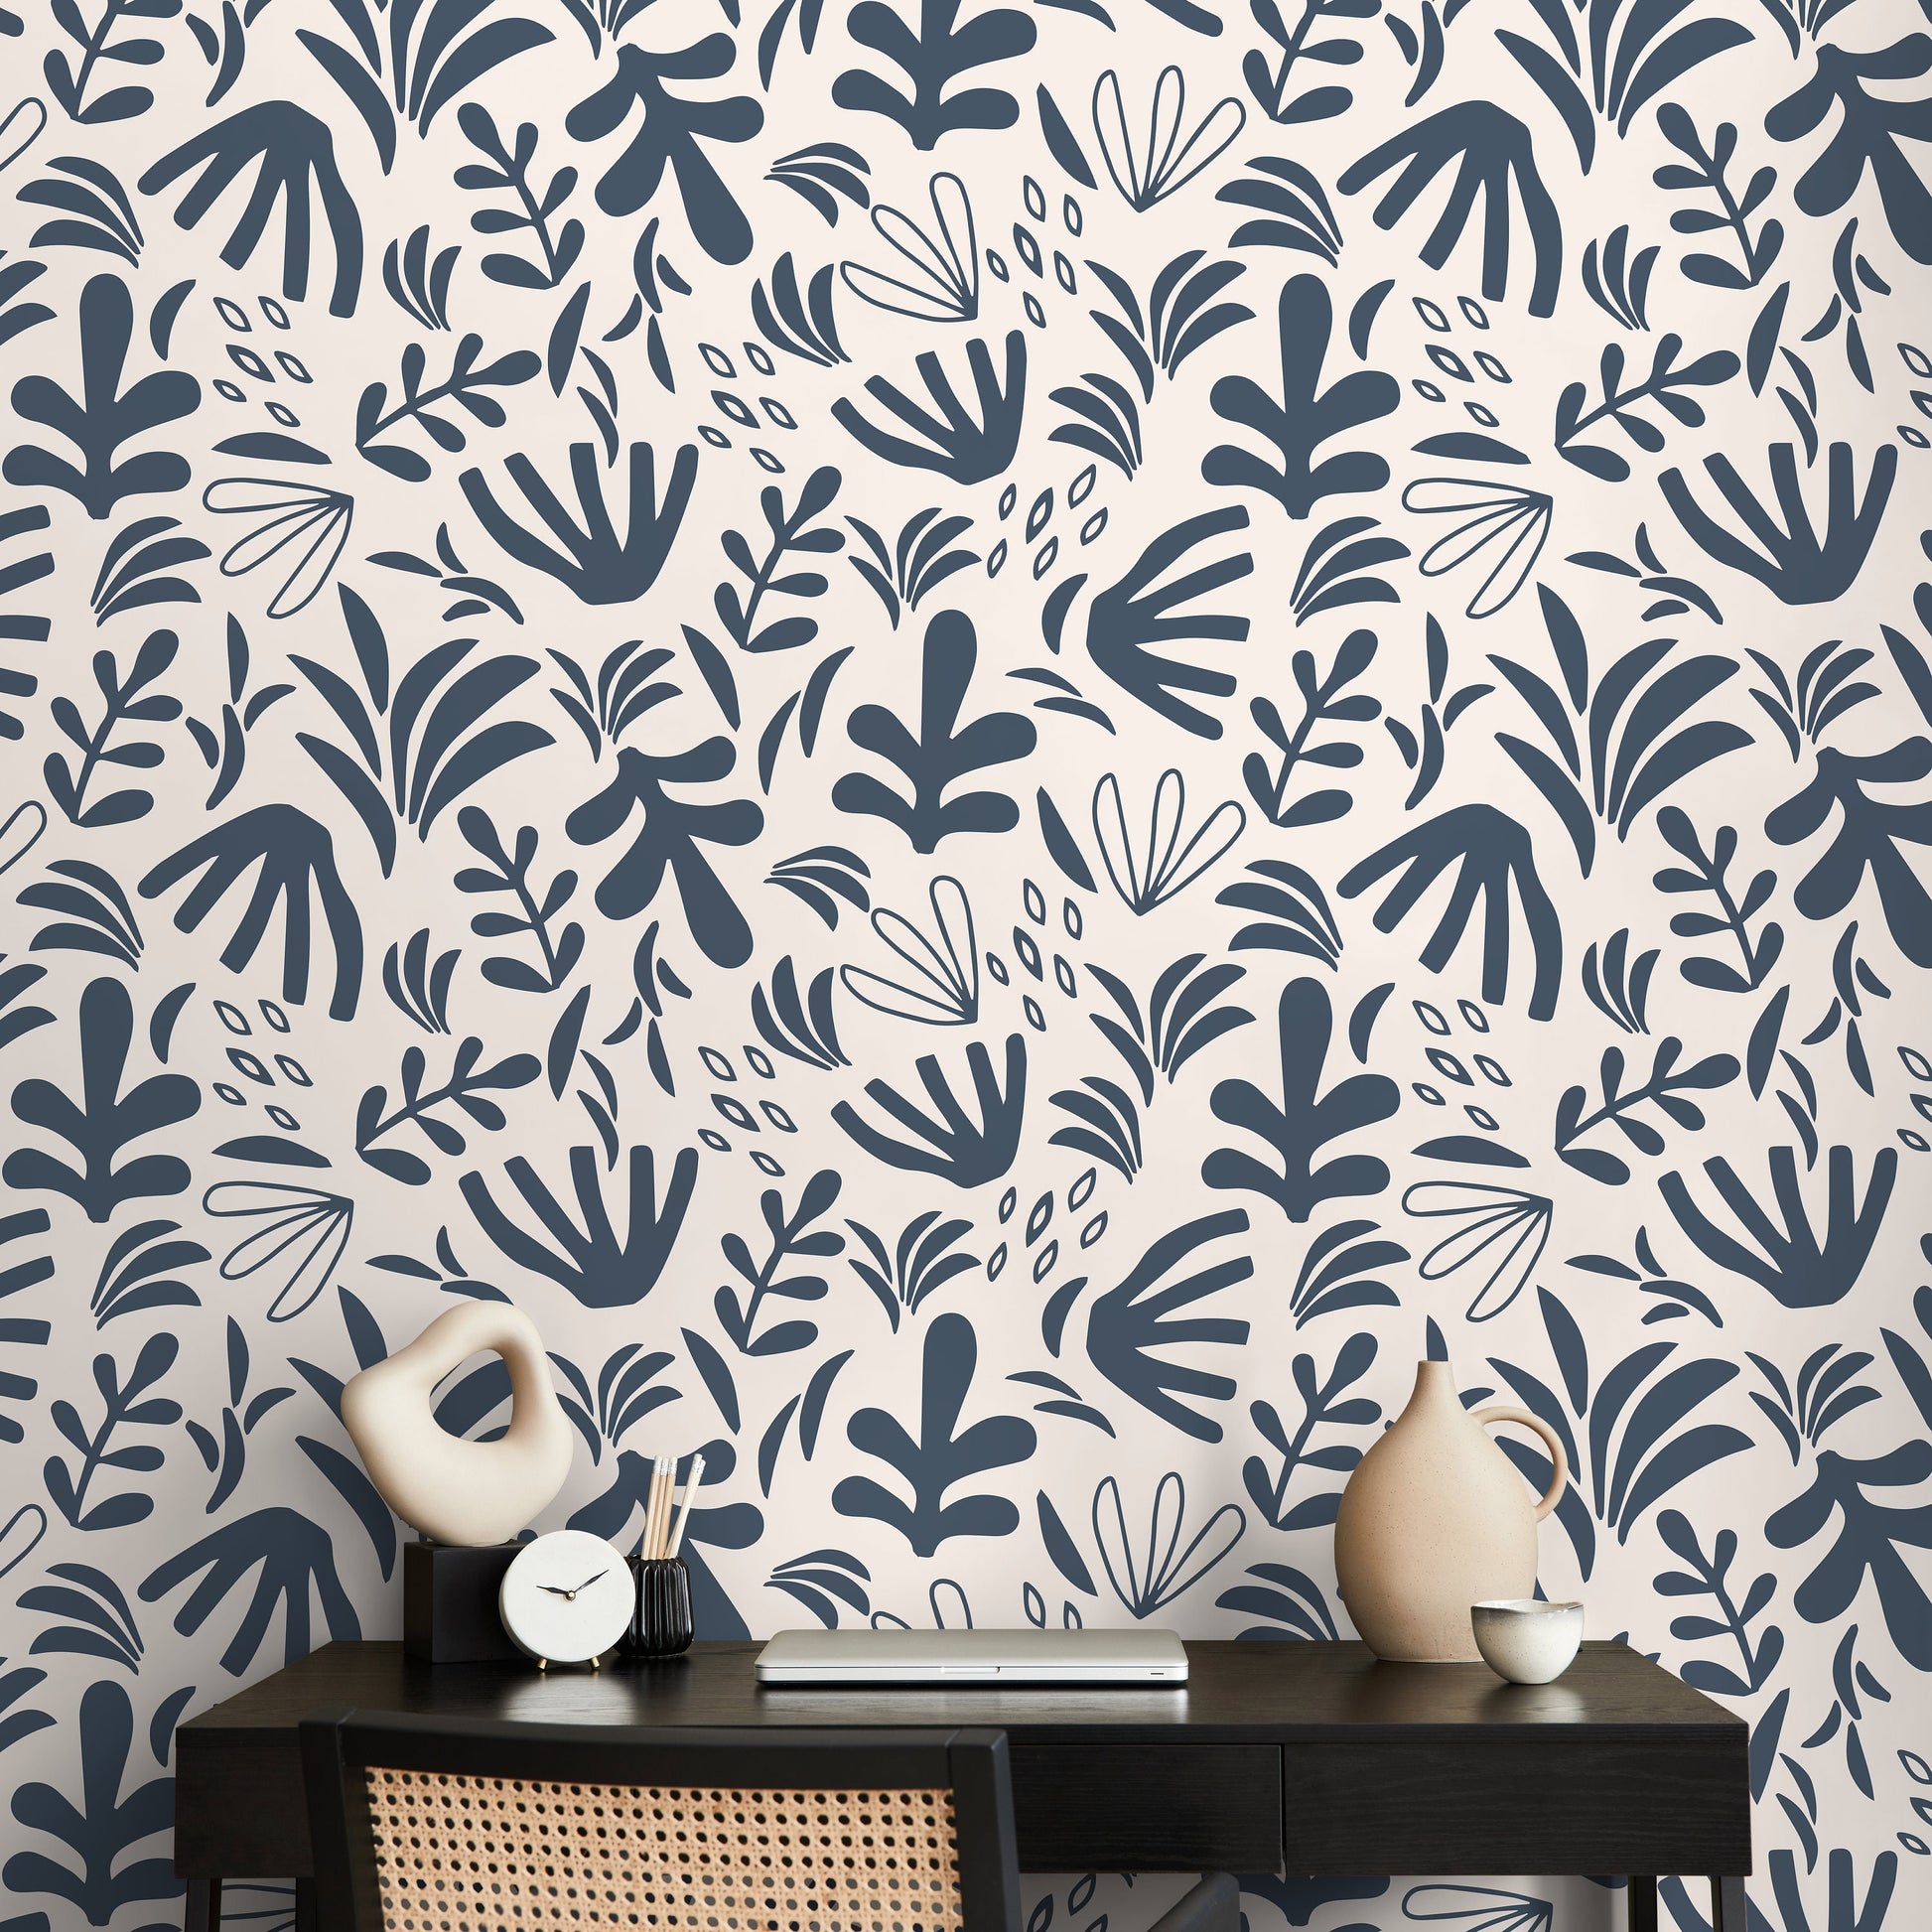 Abstract Garden Wallpaper Boho Wallpaper Peel and Stick and Traditional Wallpaper - D679